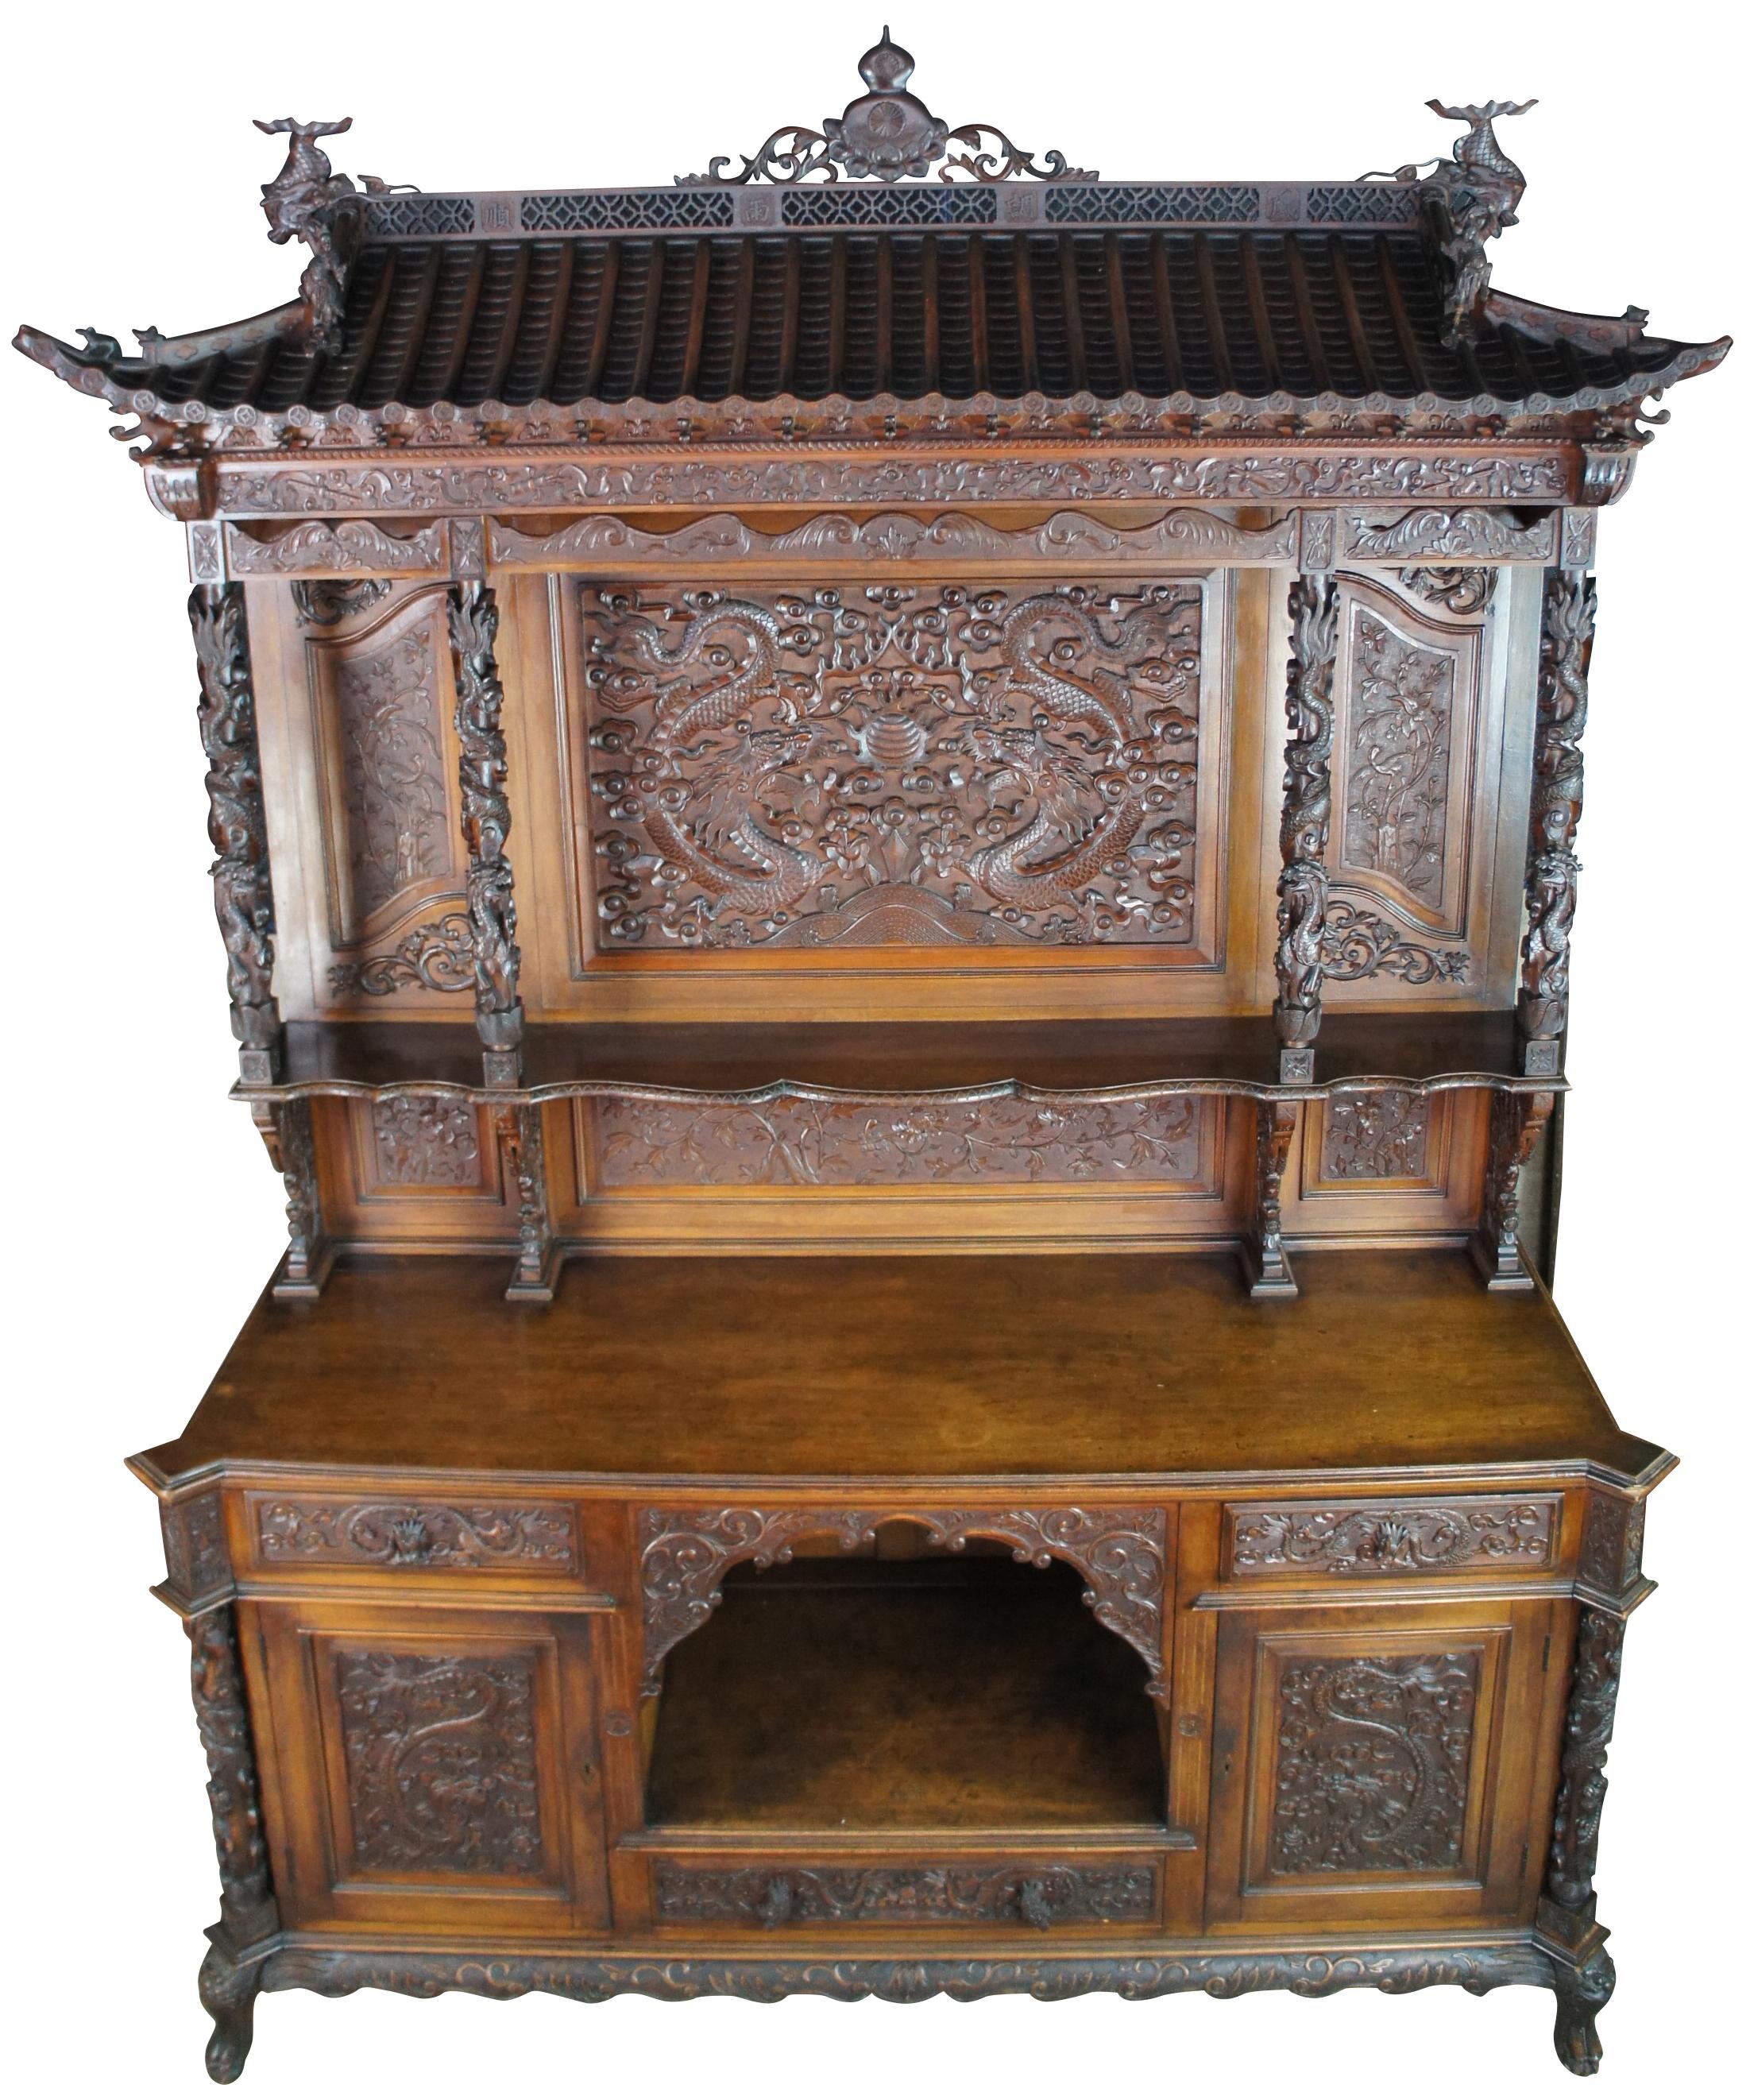 An outstanding rare one of a kind American Victorian Chinoiserie Carved Dining Room Suite, Circa 1880s. Made from mahogany with a meticulous high relief Chinese Oriental dragon carved theme throughout. The suite features, a large hutch, 12 chairs,